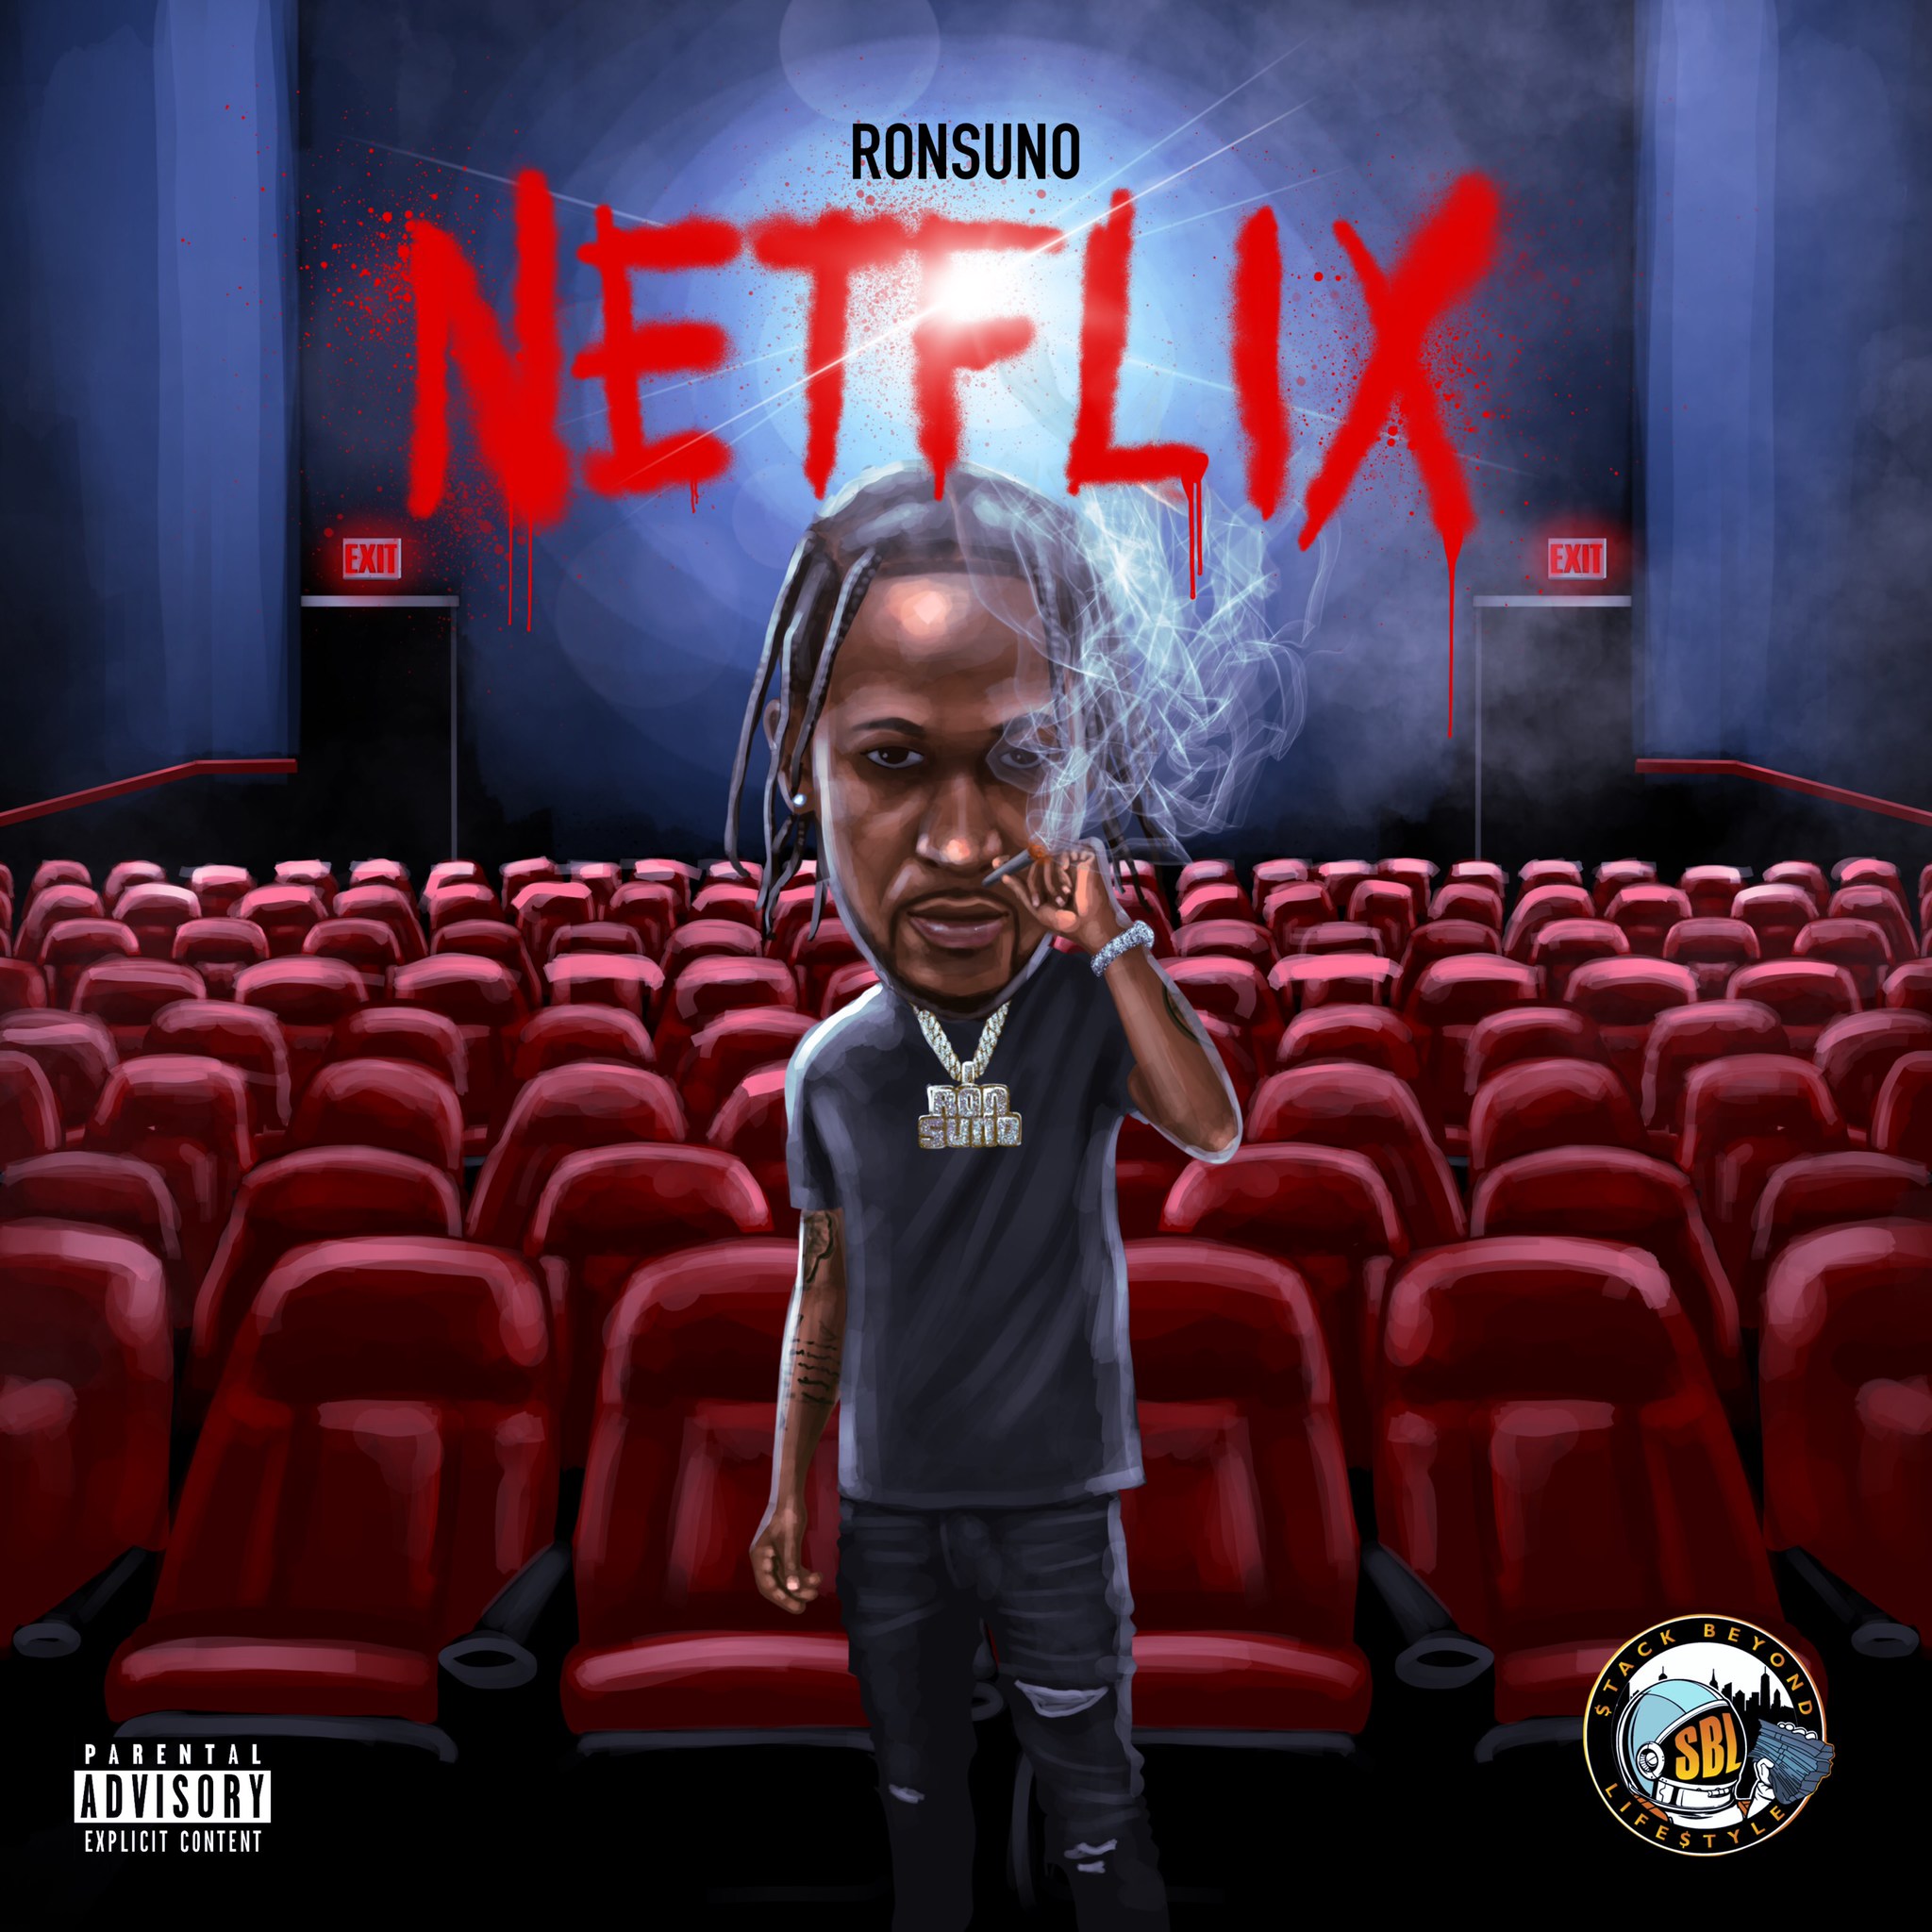 Ron Suno Releases Audio and Visual for New Song "Netflix"